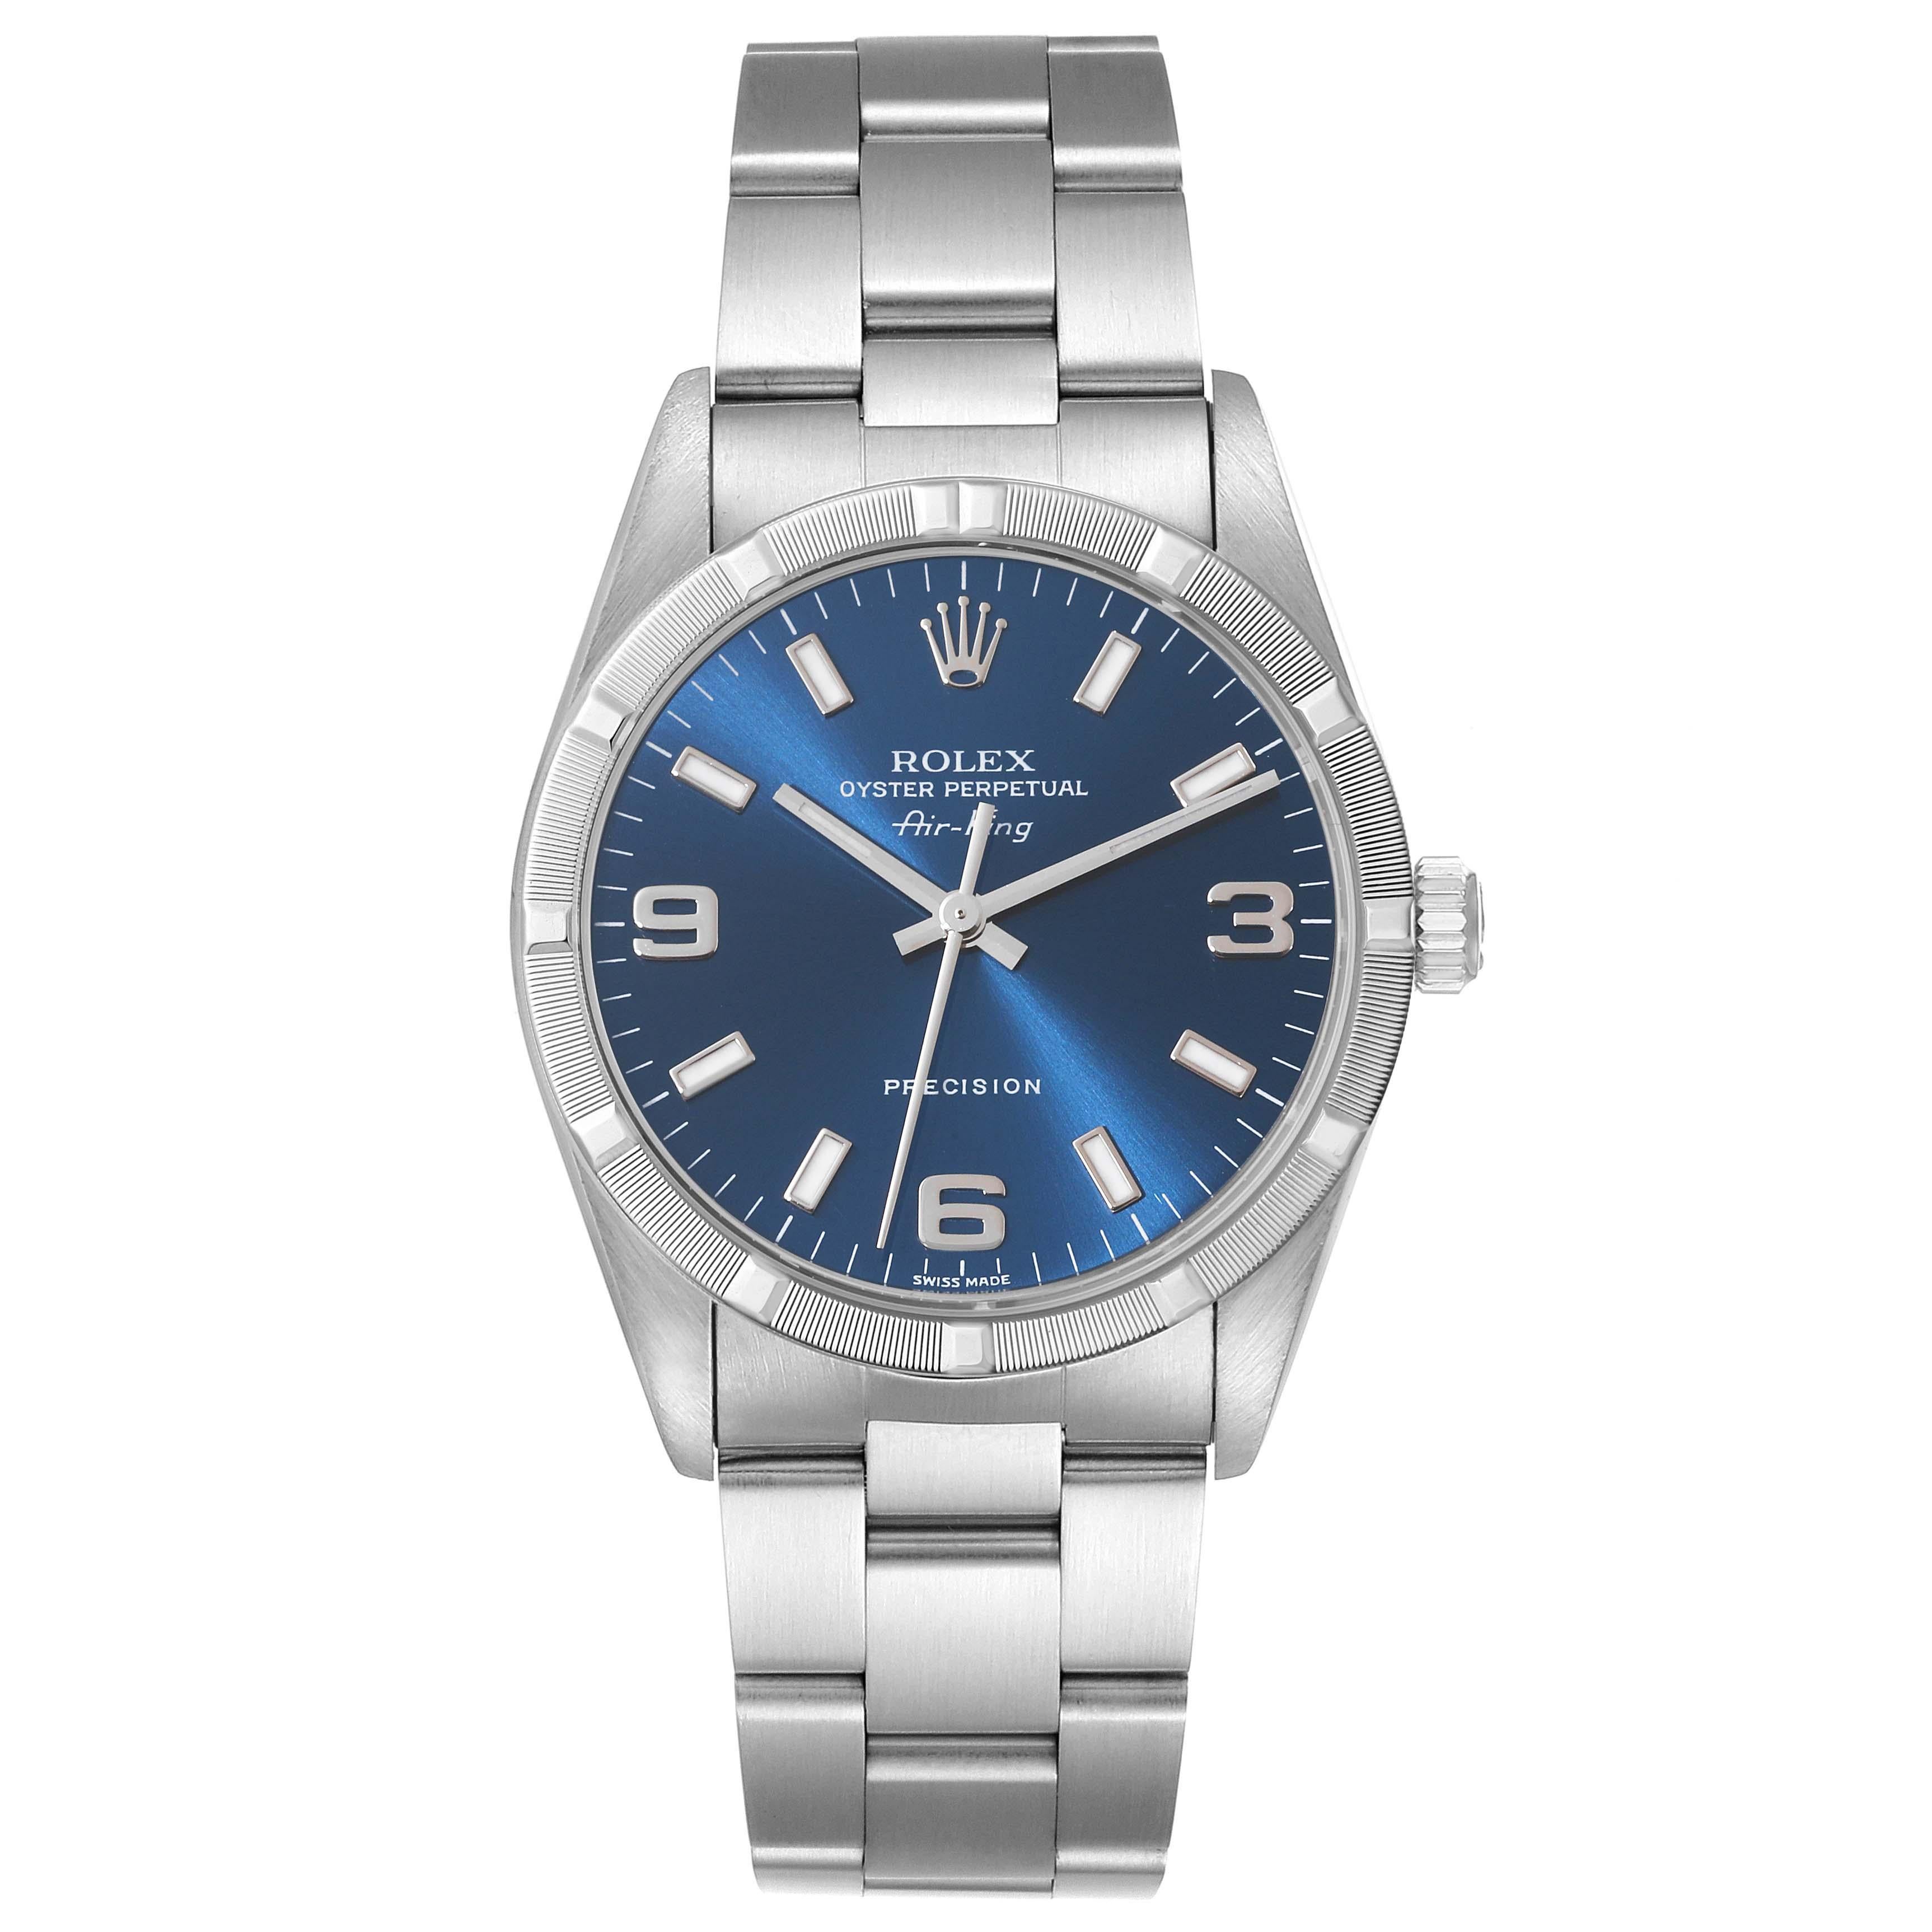 Rolex Air King Blue Dial Engine Turned Bezel Steel Mens Watch 14010 Box Papers. Automatic self-winding movement. Stainless steel case 34 mm in diameter. Rolex logo on the crown. Stainless steel engine turned bezel. Scratch resistant sapphire